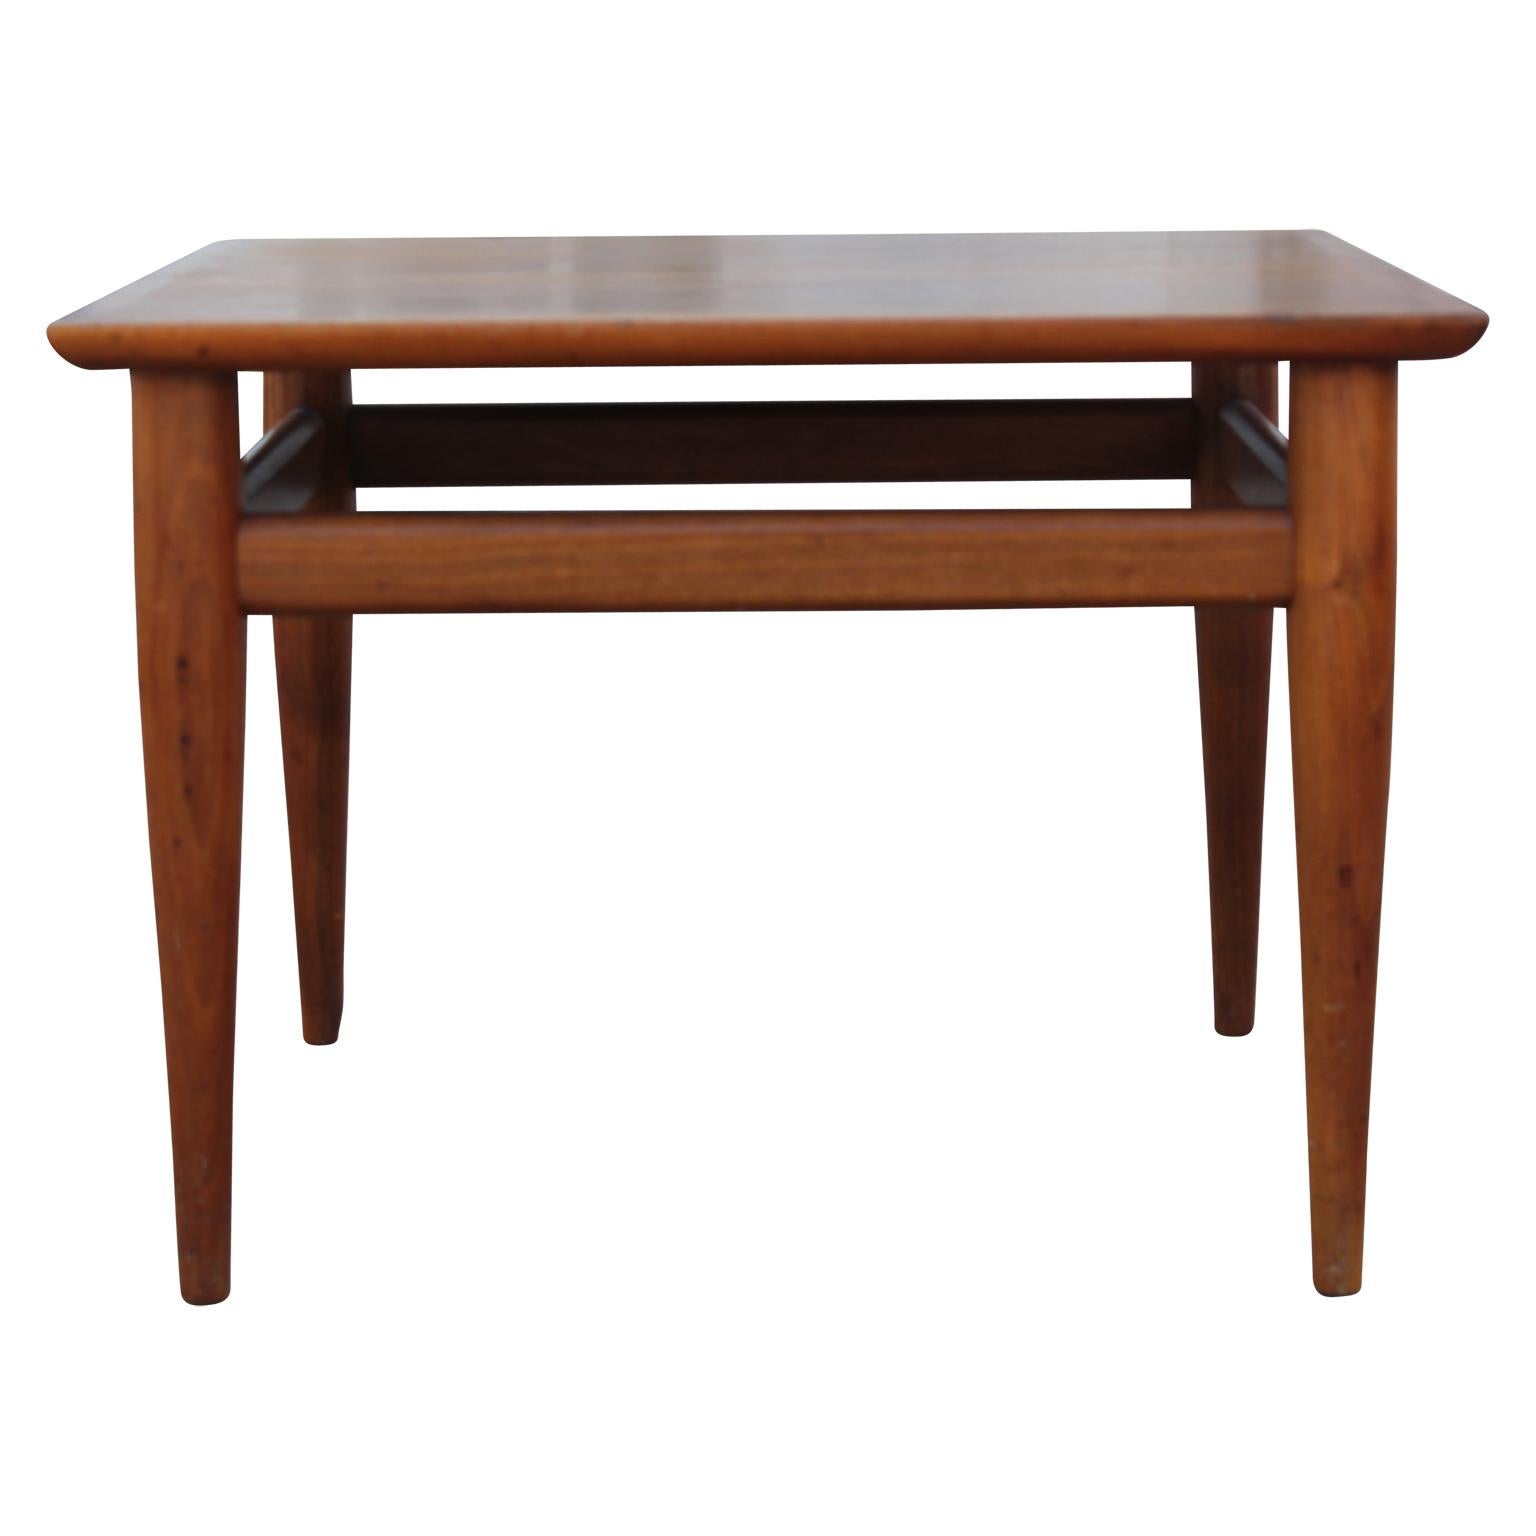 Sleek midcentury style side table. The clean lines and polished wood make it very beautiful to use as an end table.